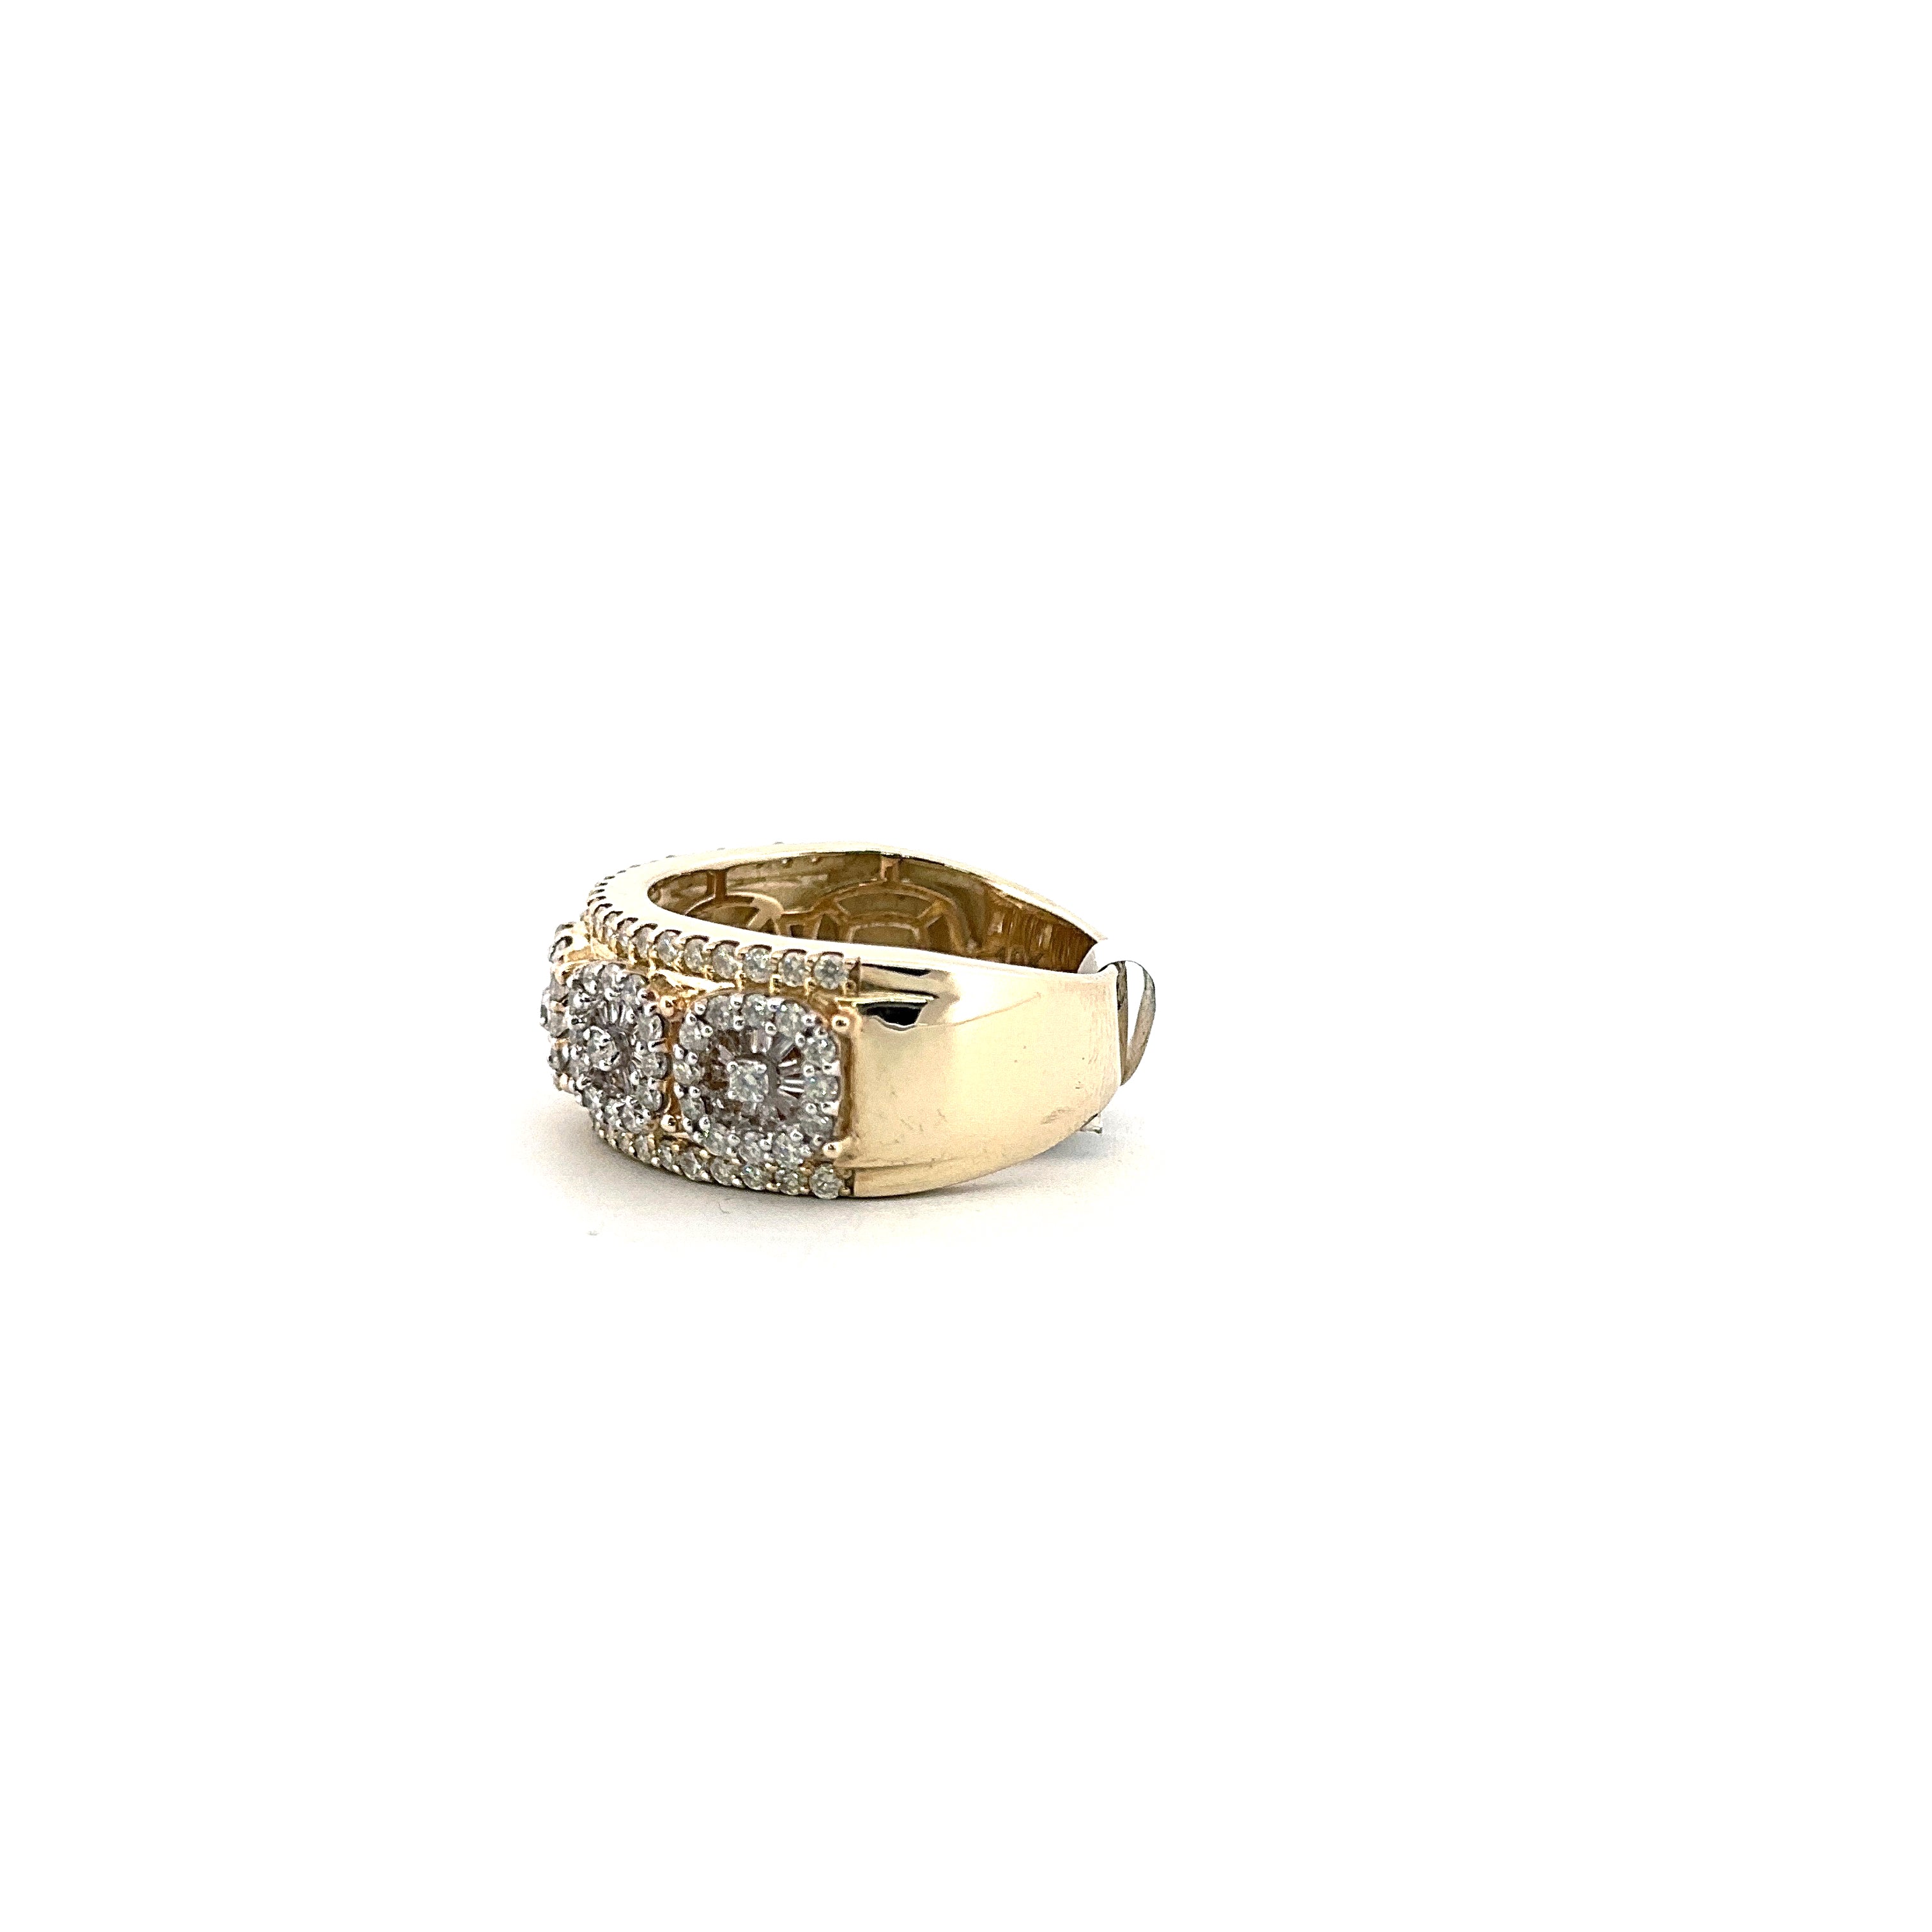 10 KT Yellow Gold Ring 1.70CTW